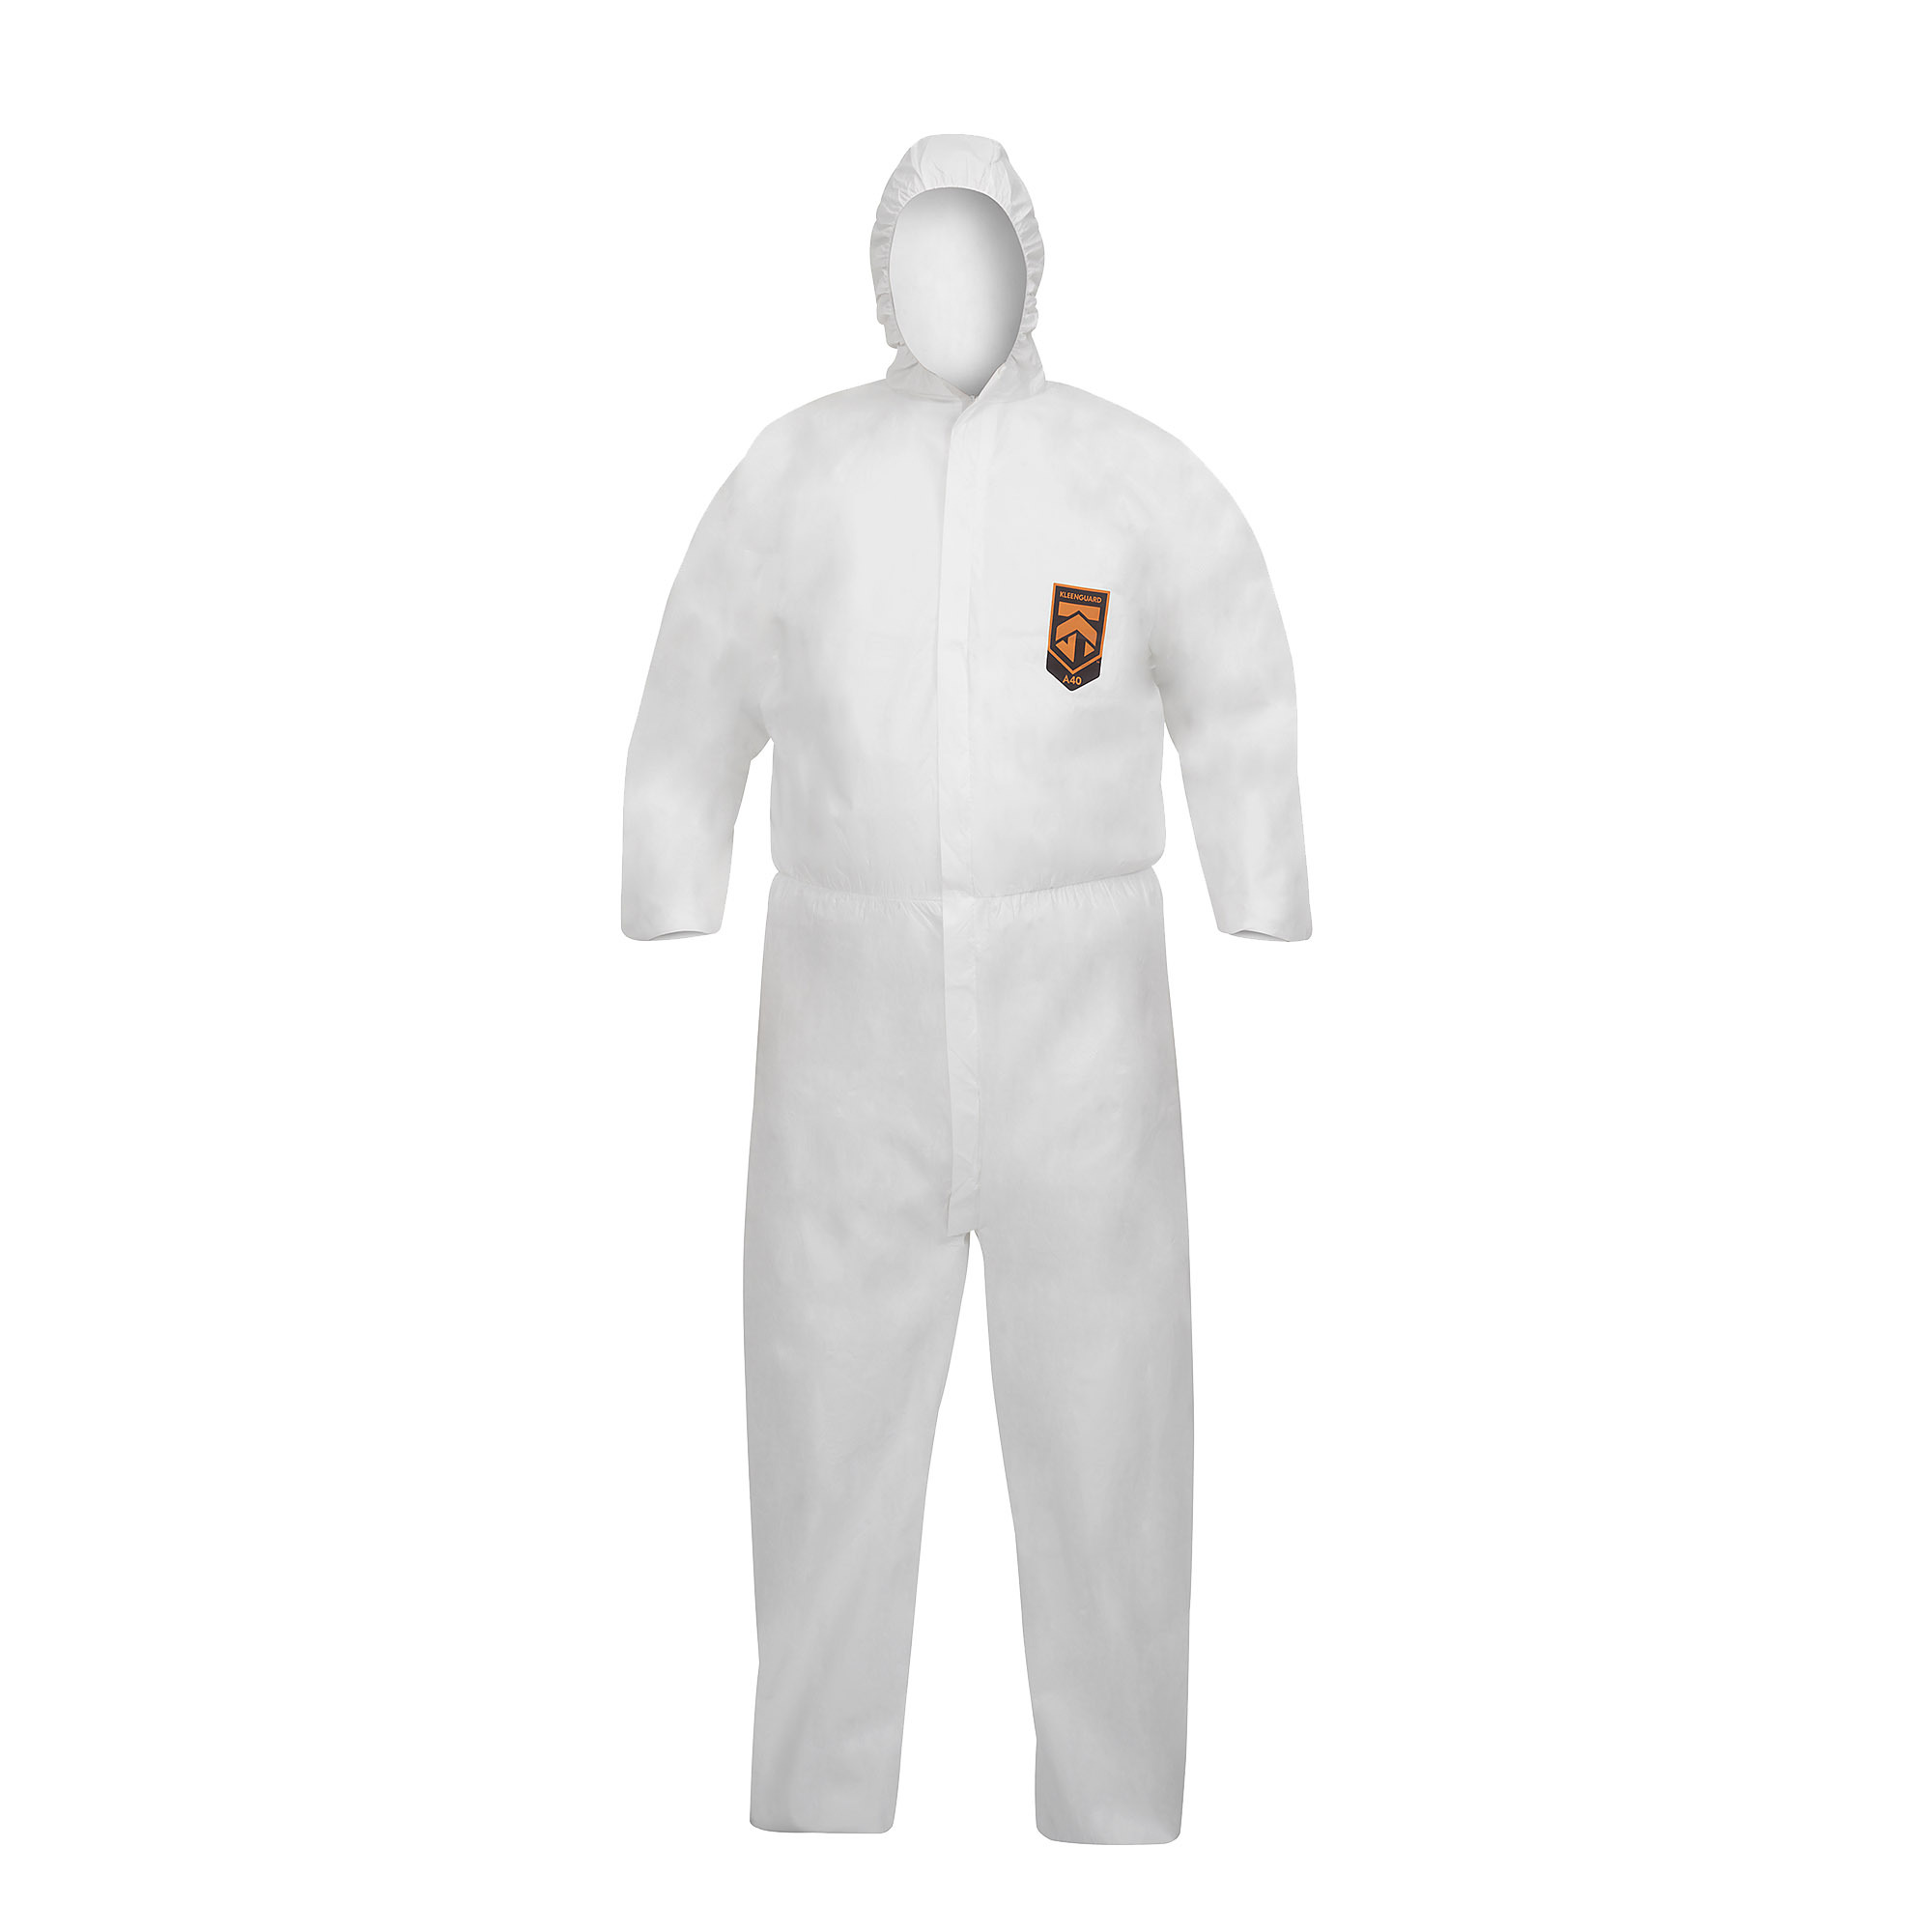 KleenGuard® A40 Liquid & Particle Protection Hooded Coveralls (97930), Extra Large White Coveralls, 25 Coveralls/Case, 1 Coverall / Pack (25 coveralls) - 97930